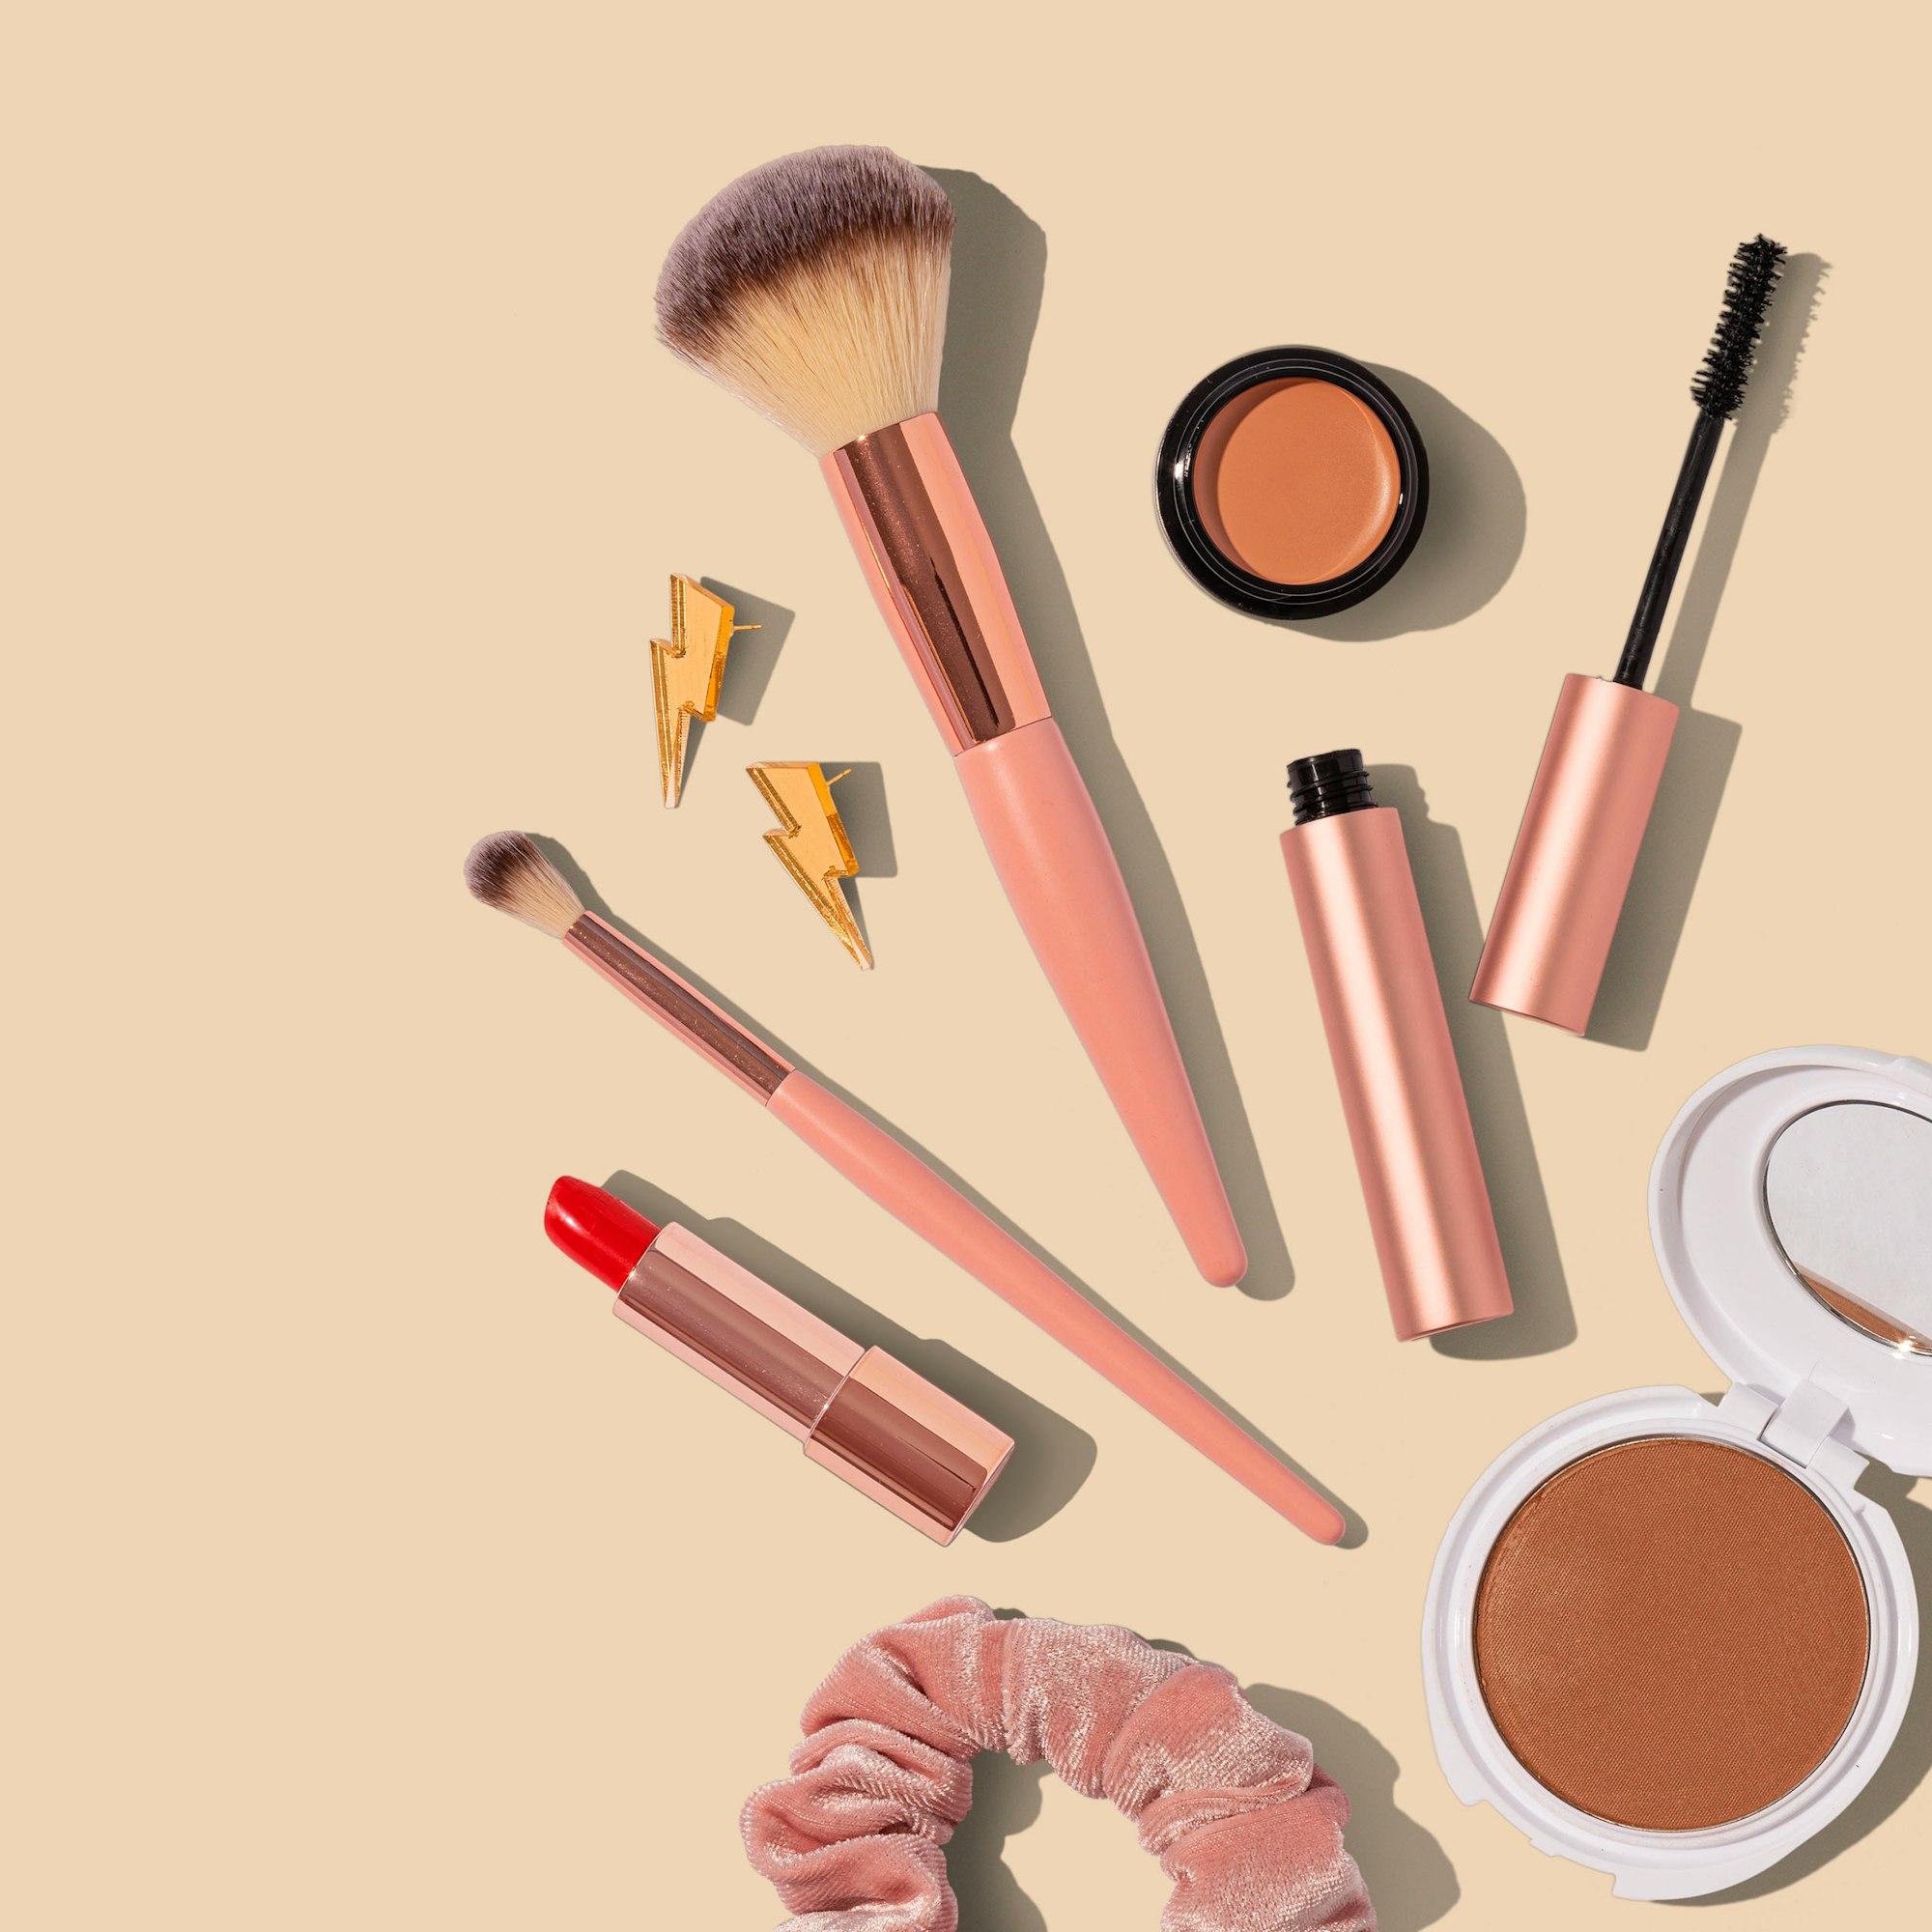 How to Build Customer Loyalty in the Beauty Industry